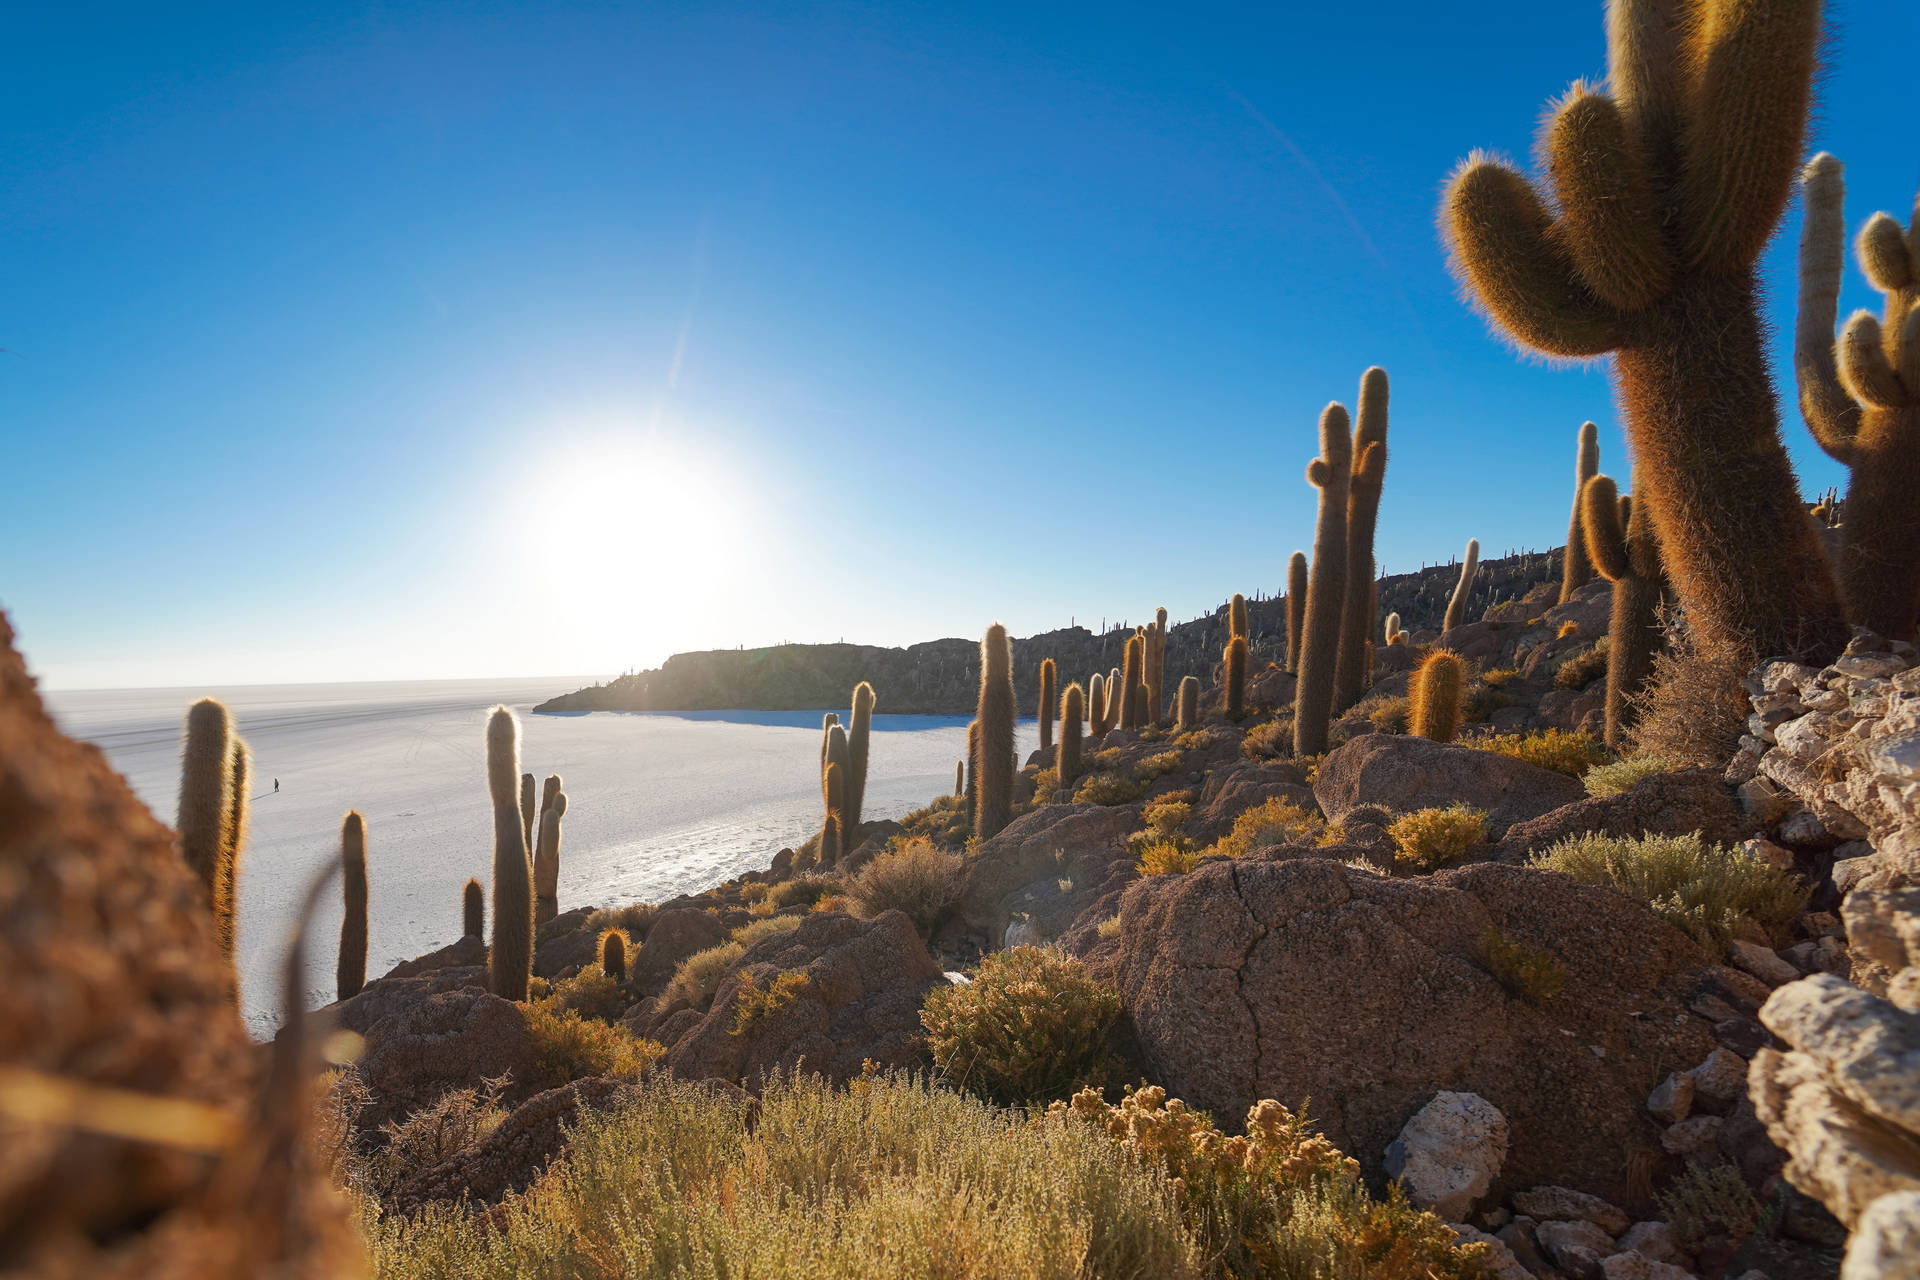 Cactus In The Desert In Chile Background